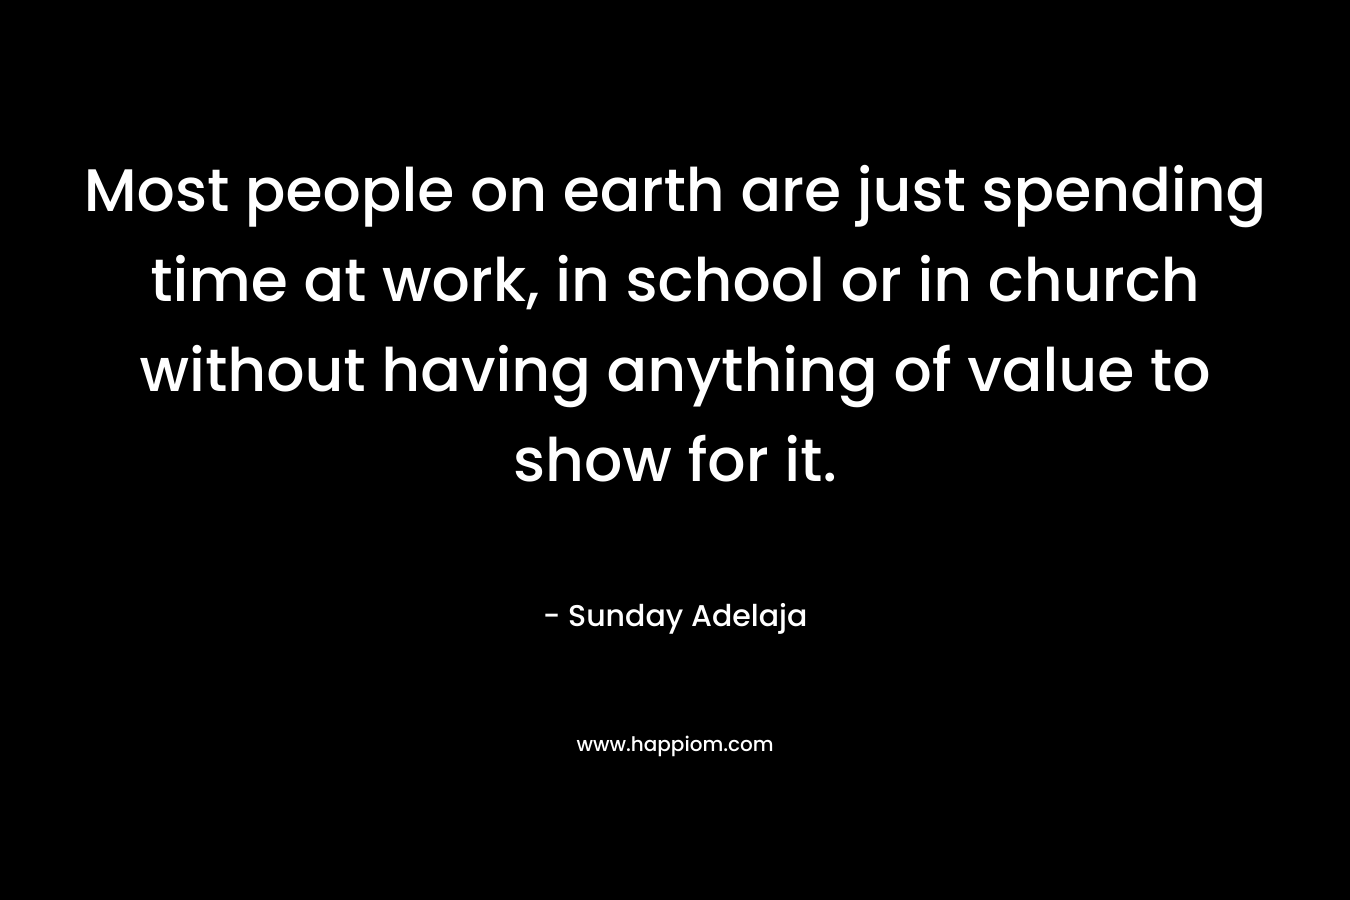 Most people on earth are just spending time at work, in school or in church without having anything of value to show for it.